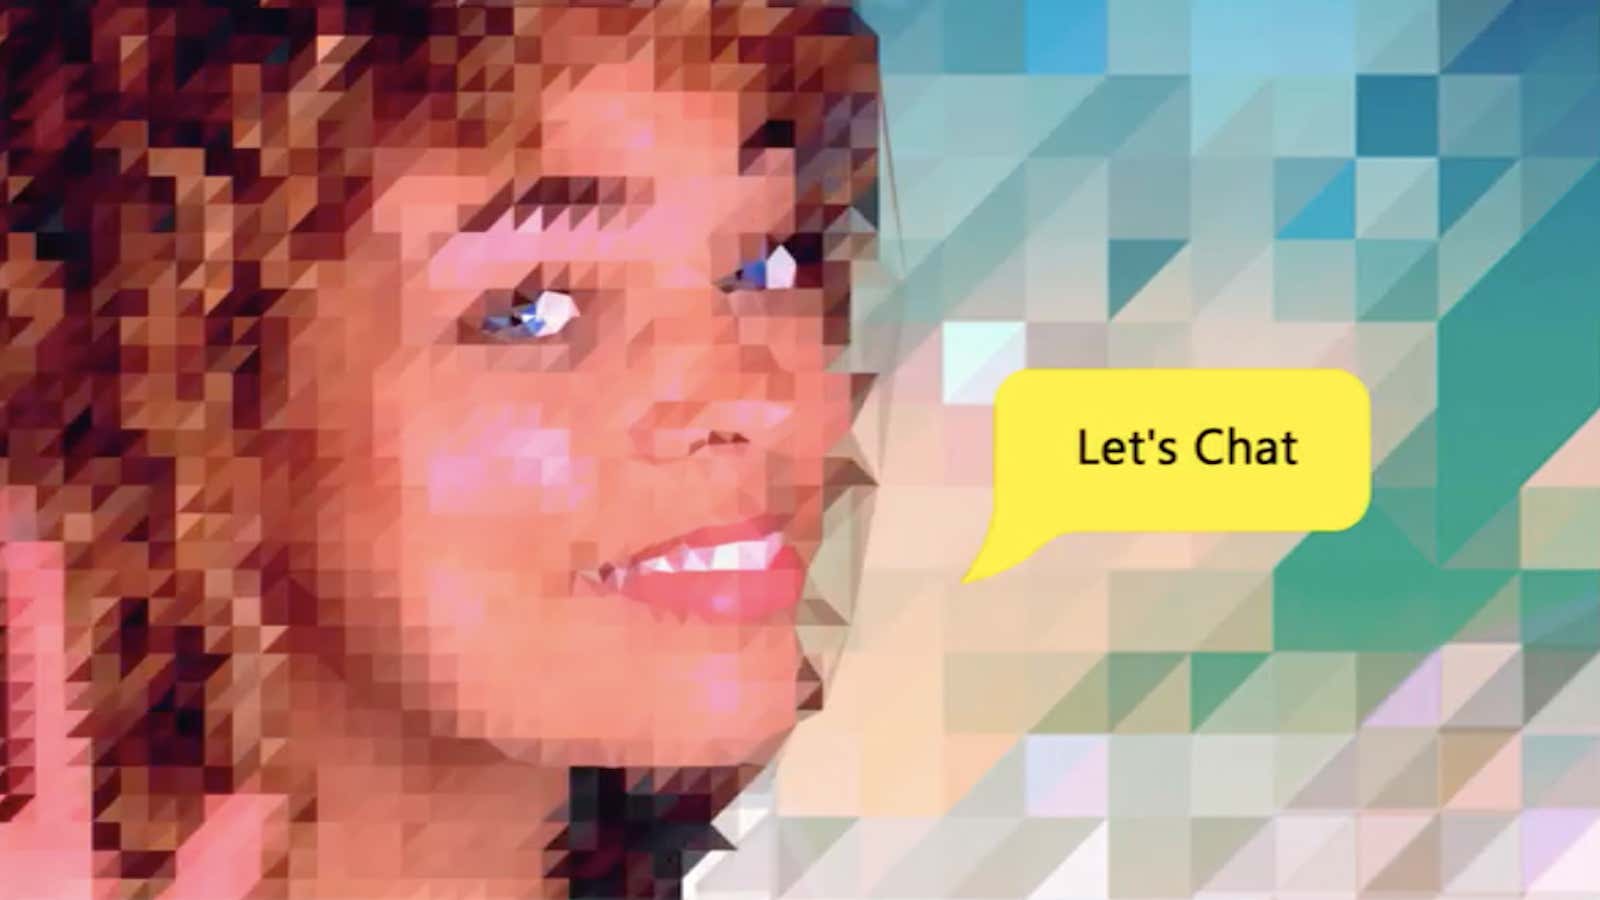 There’s nothing loljk about Microsoft’s teenage chatbot, Zo.